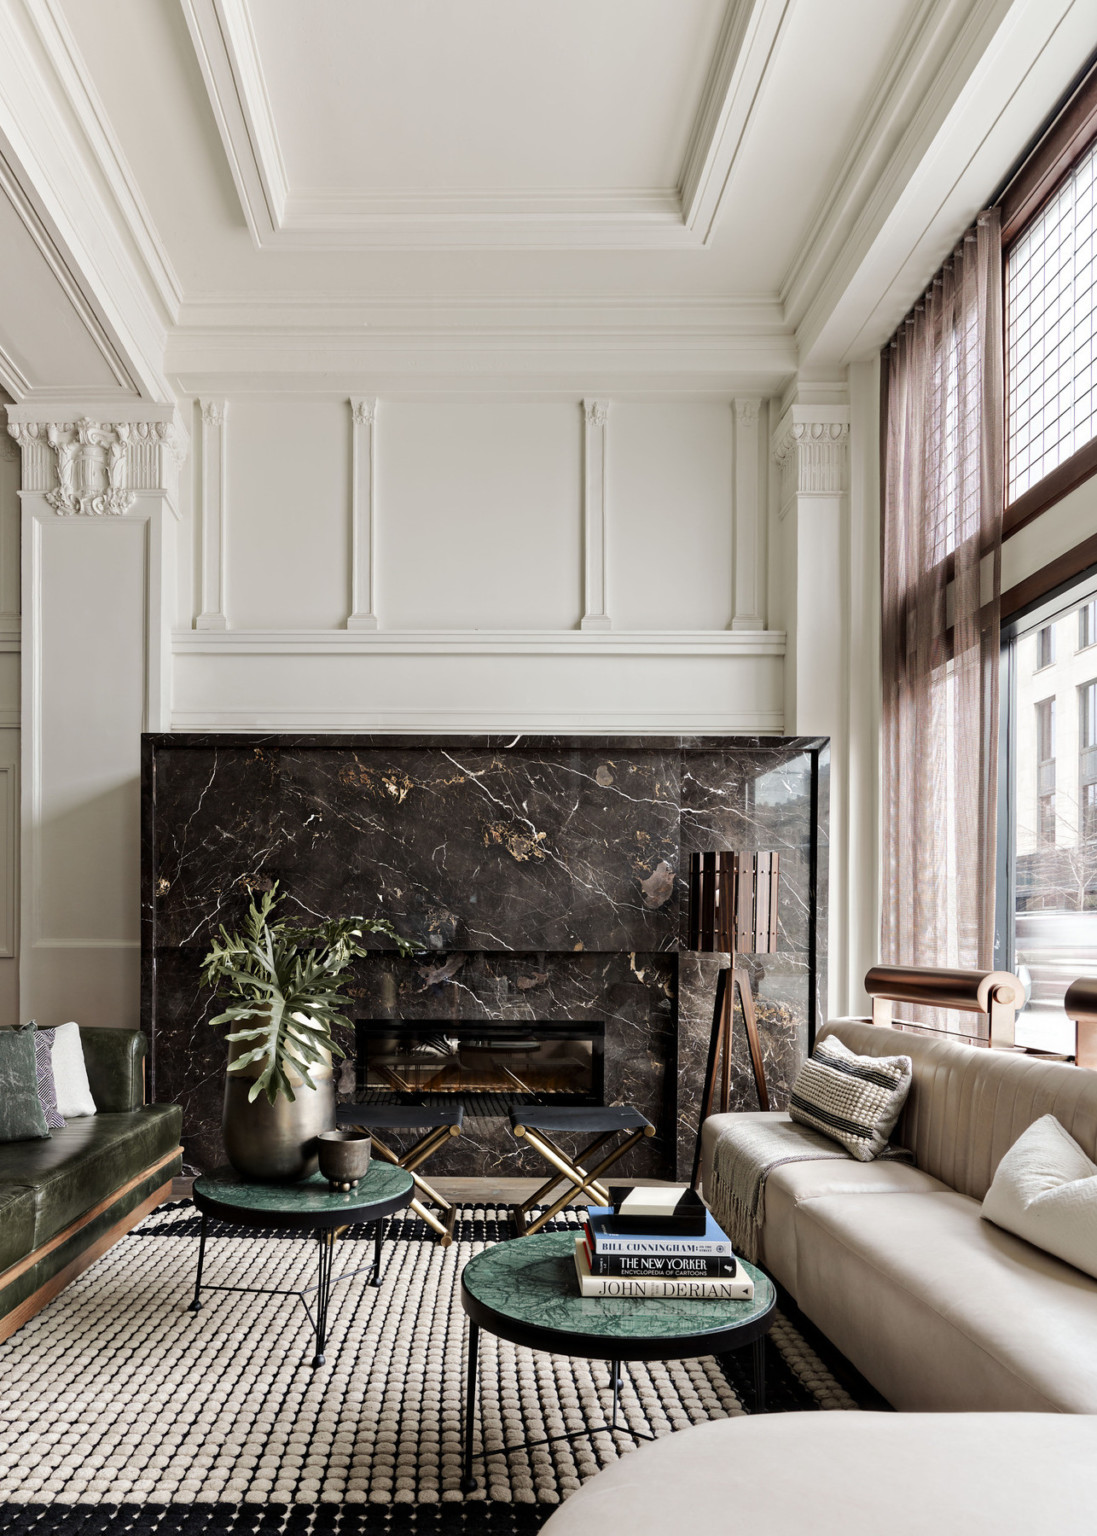 Seating area with arm chairs and cushioned bench along windows. Dark marbled fireplace on white wall with pillars and molding